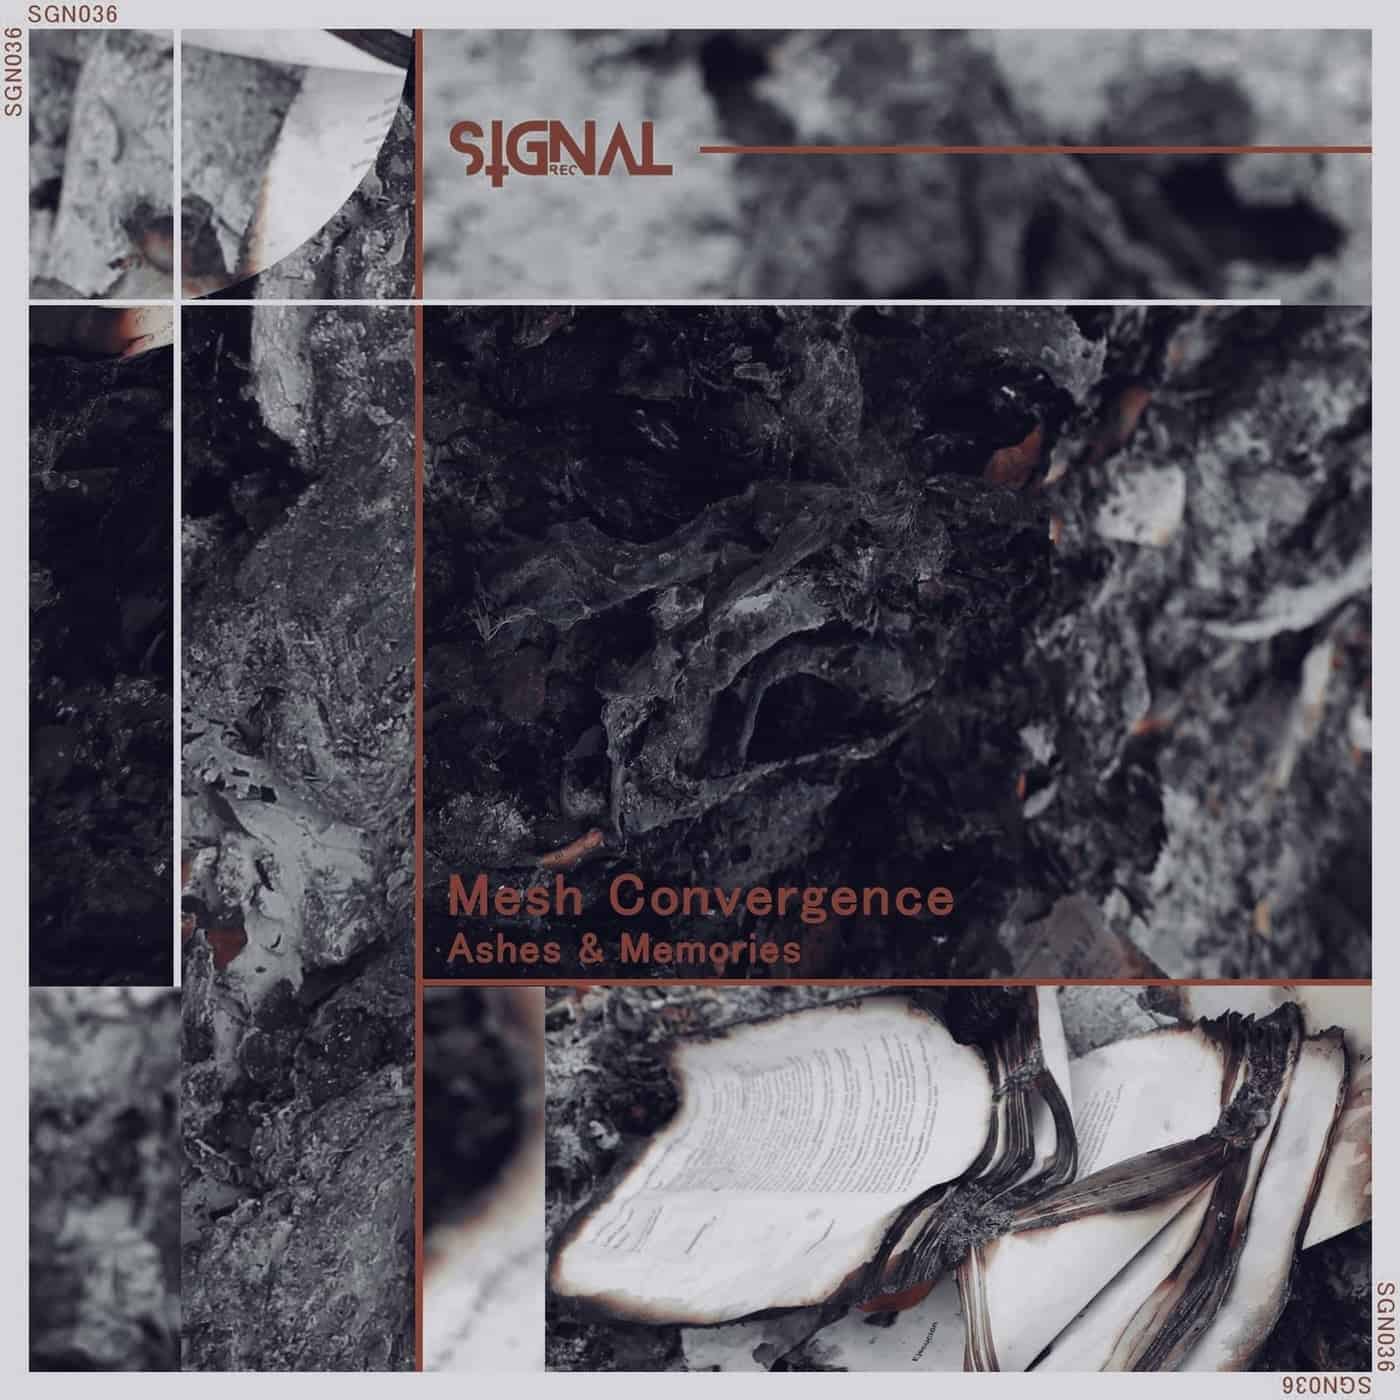 image cover: Mesh Convergence - Ashes & Memories / SGN036